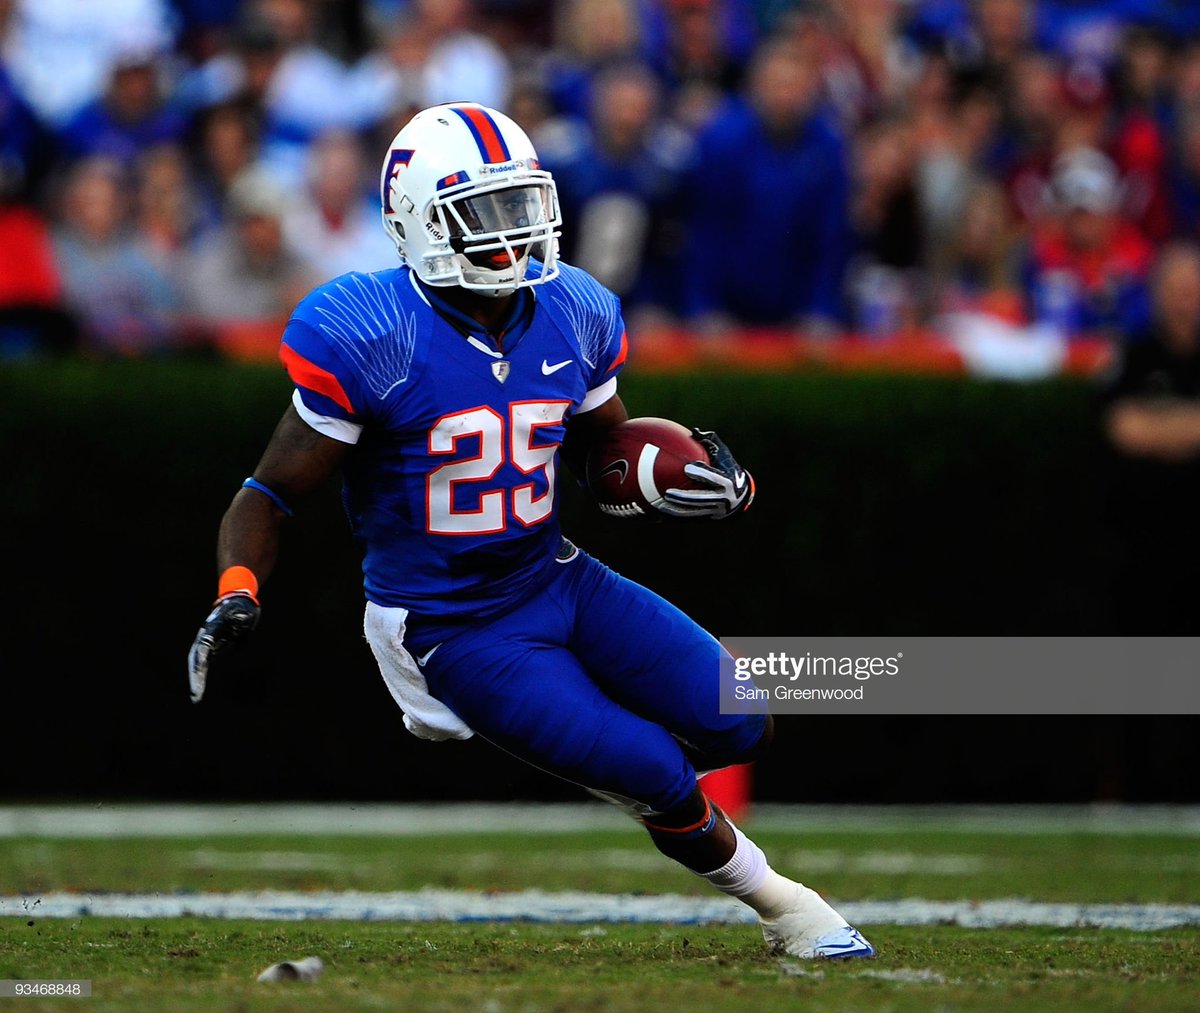 Then, in Tebow’s final game in The Swamp, Florida debuted new look white helmets for the 2009 Nike Pro Combat uniforms.“Nike designers immersed themselves in Gators’ history and lore to bring inspiration cues to the look and direction of the uniforms” -  http://FloridaGators.com 